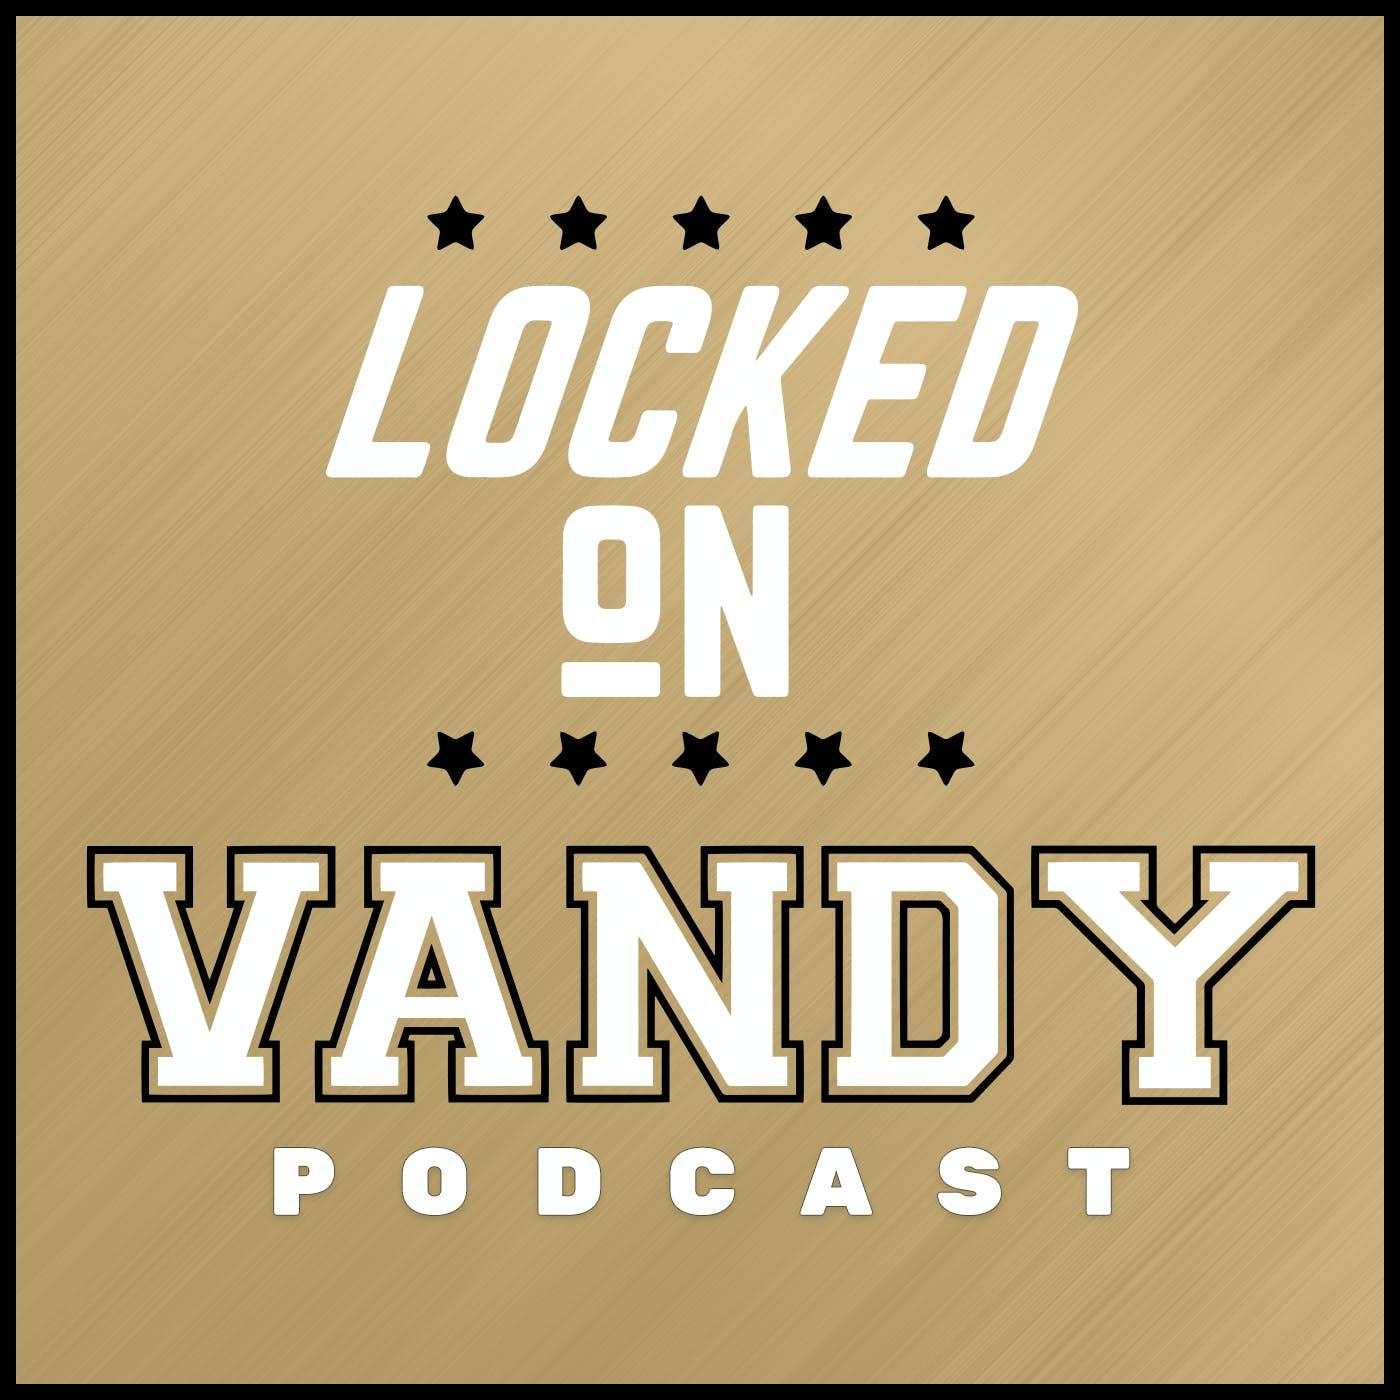 Show poster of Locked On Vandy – Daily Podcast on Vanderbilt University Commodores Football and Basketball